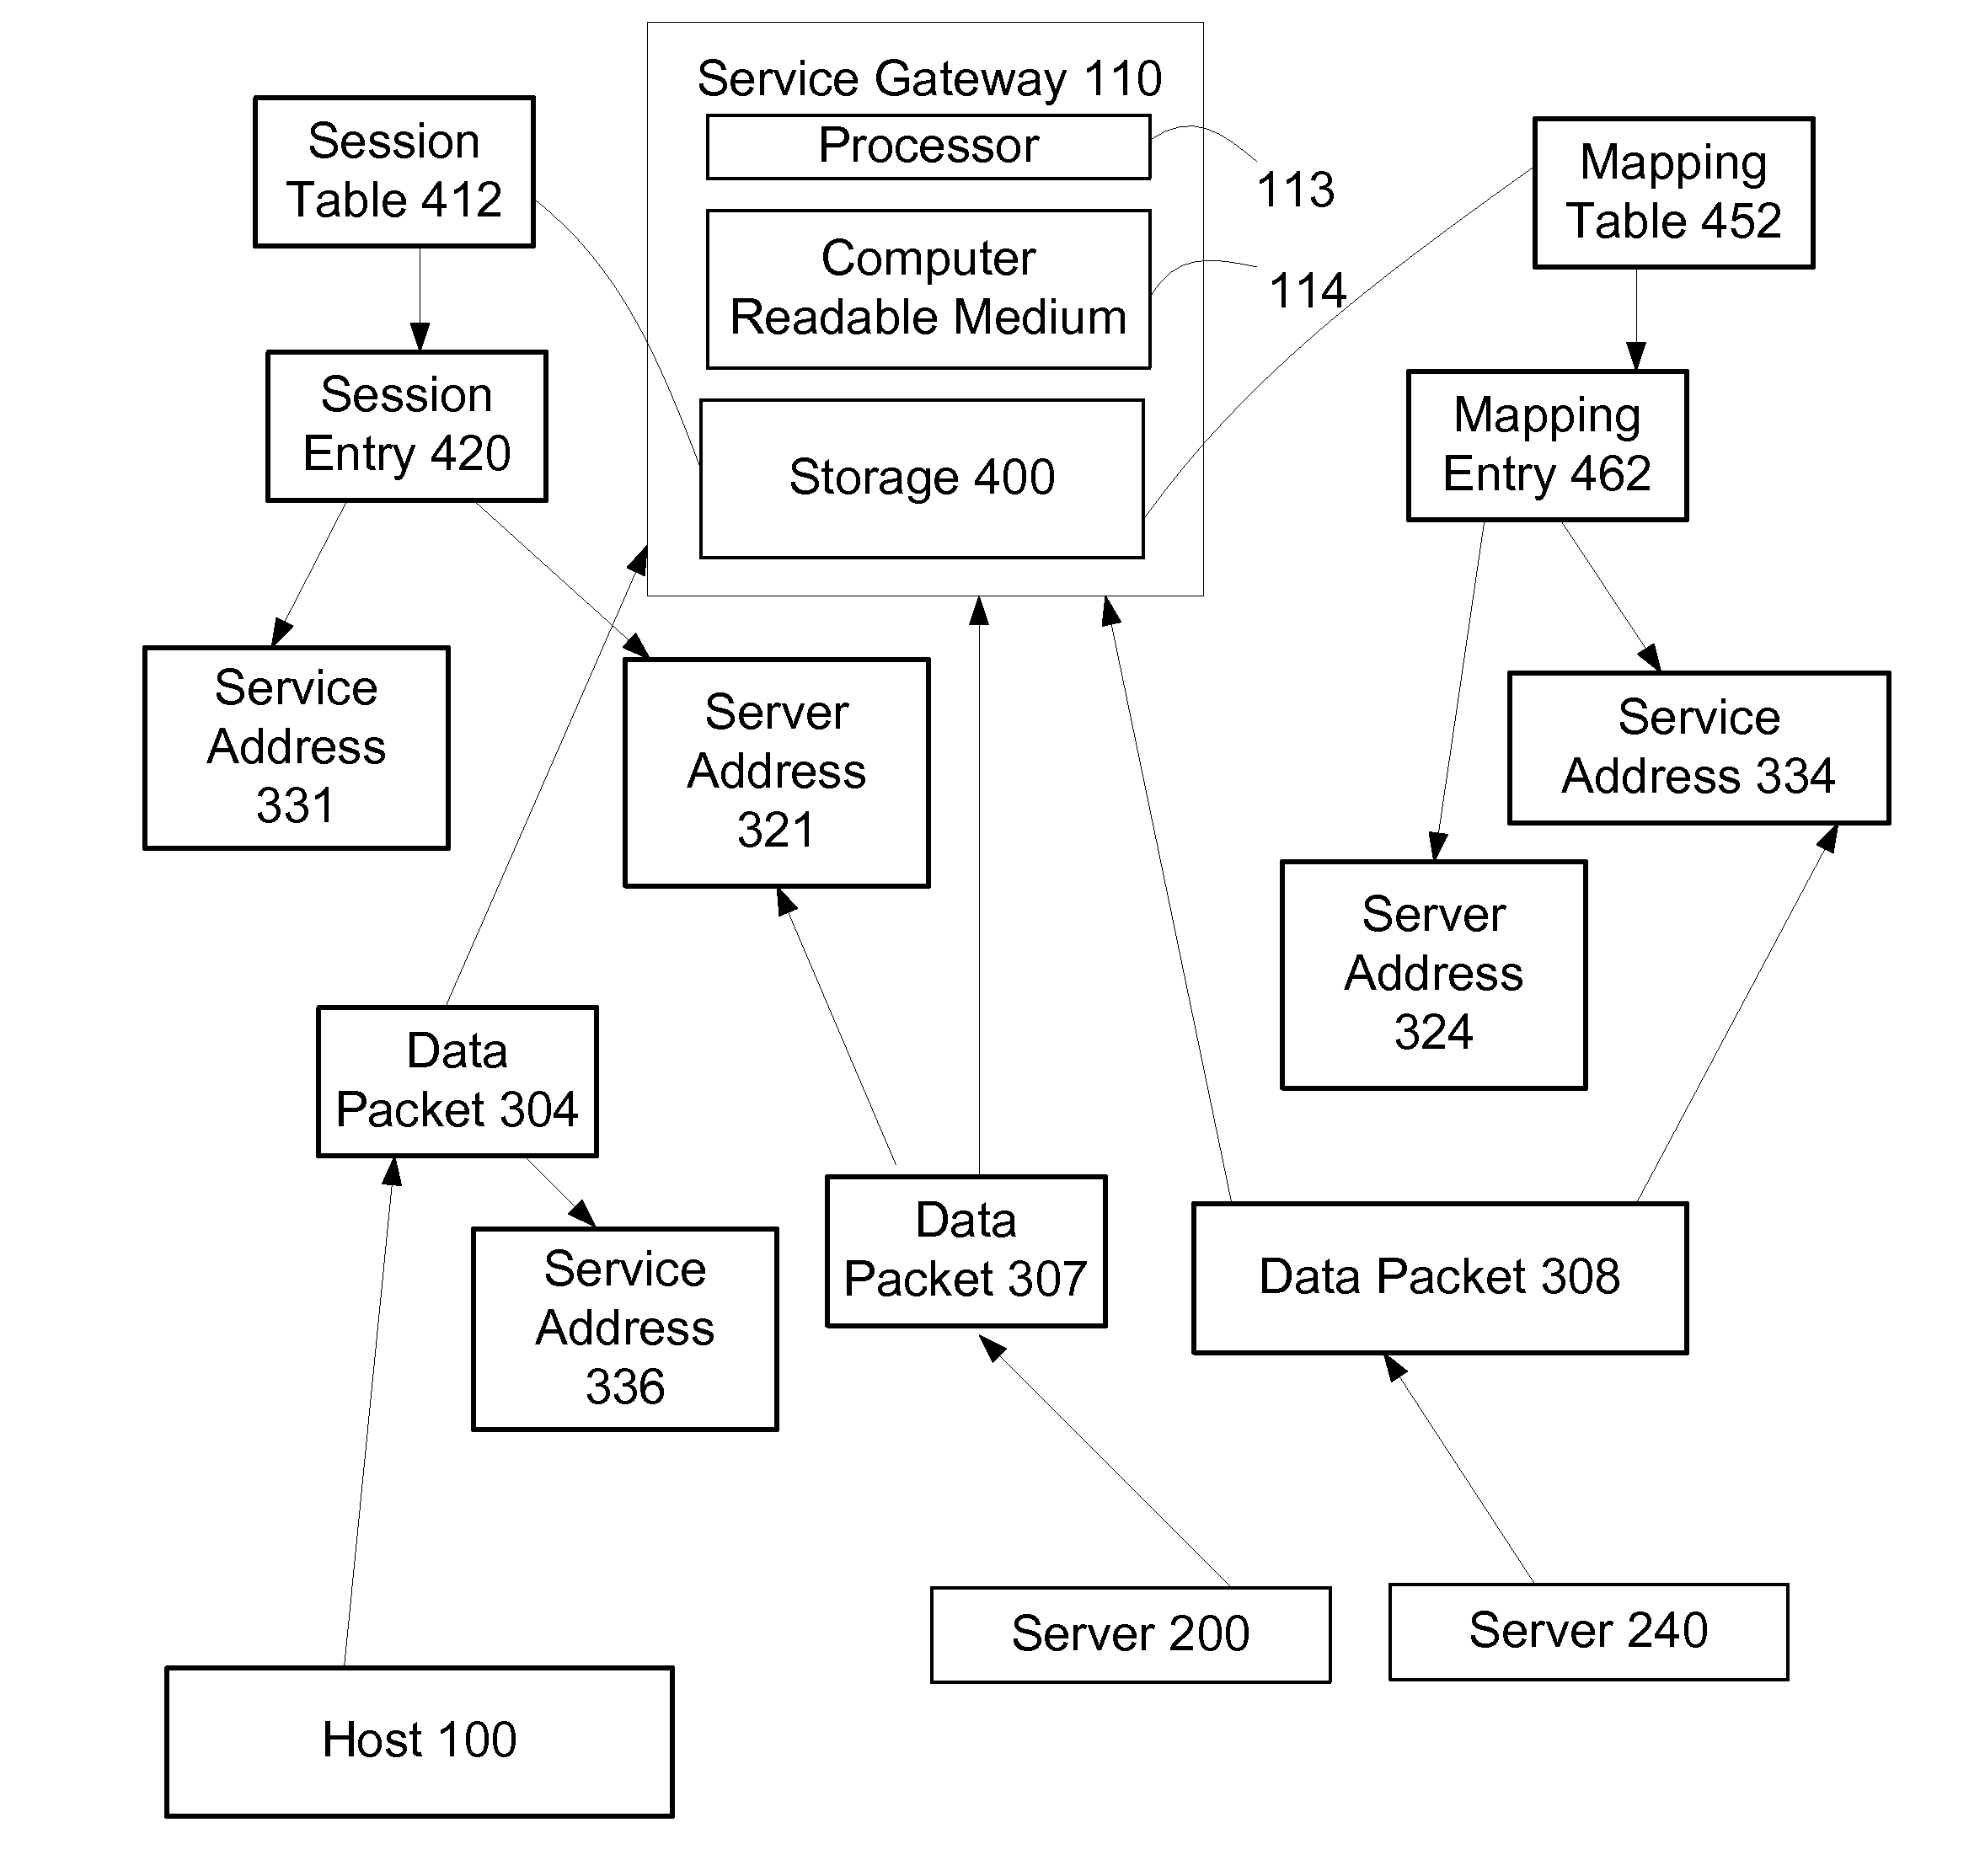 Methods to combine stateless and stateful server load balancing